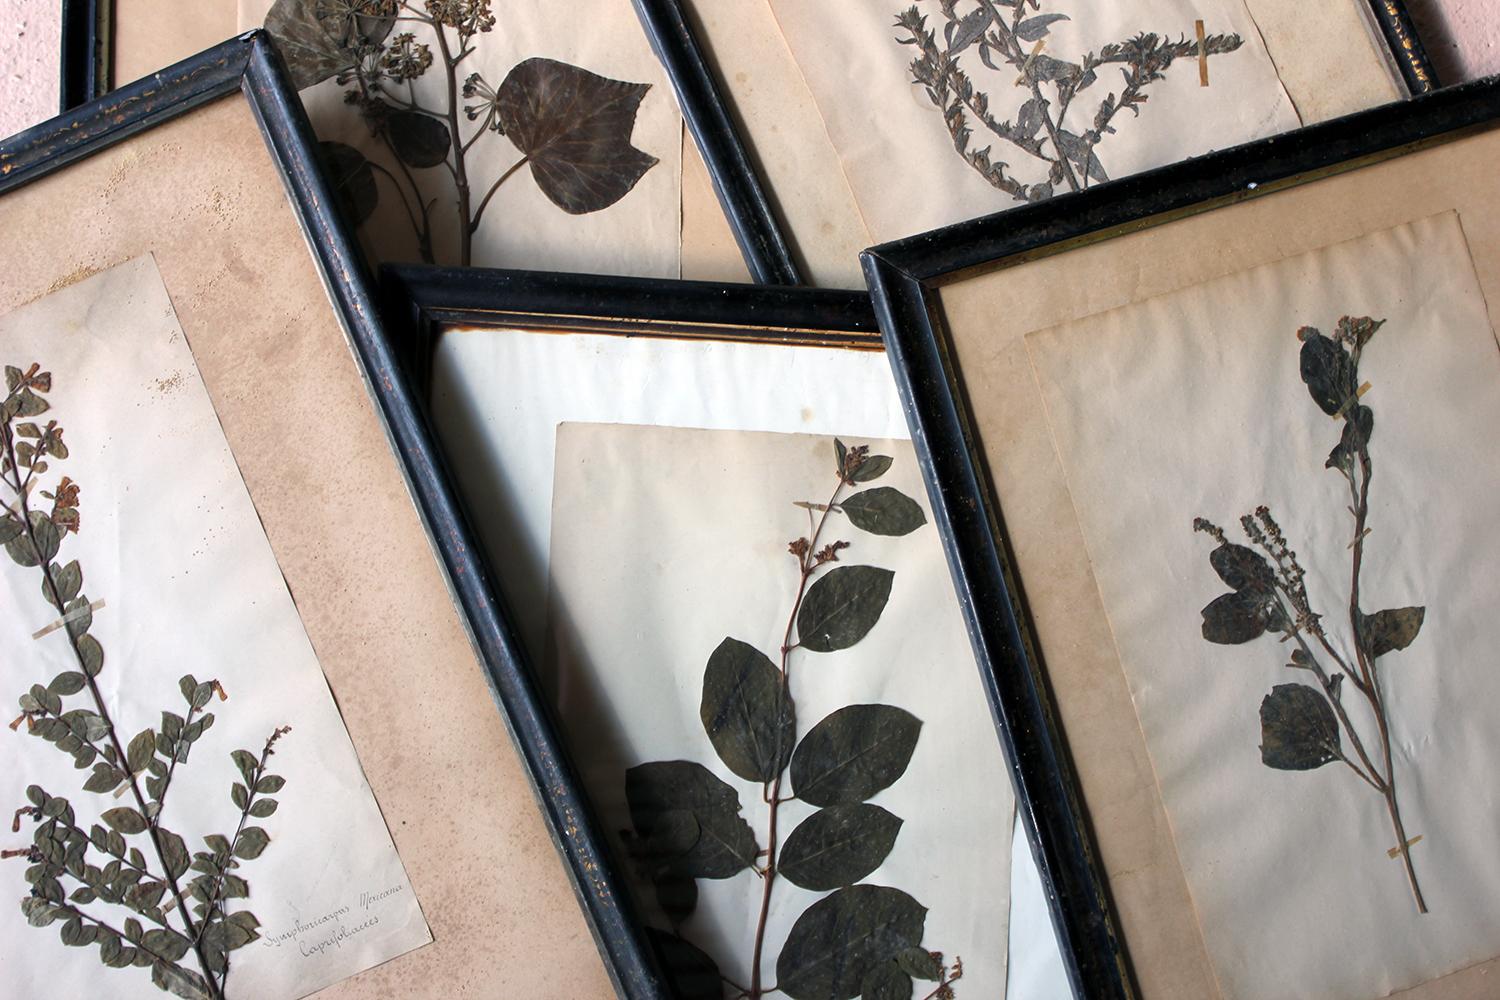 The beautifully faded collection of five wildflower botanical specimens, collected in the latter stages of the nineteenth century, residing in their original ebonized glazed frames, some being gilt decorated, with newspaper backings, surviving from